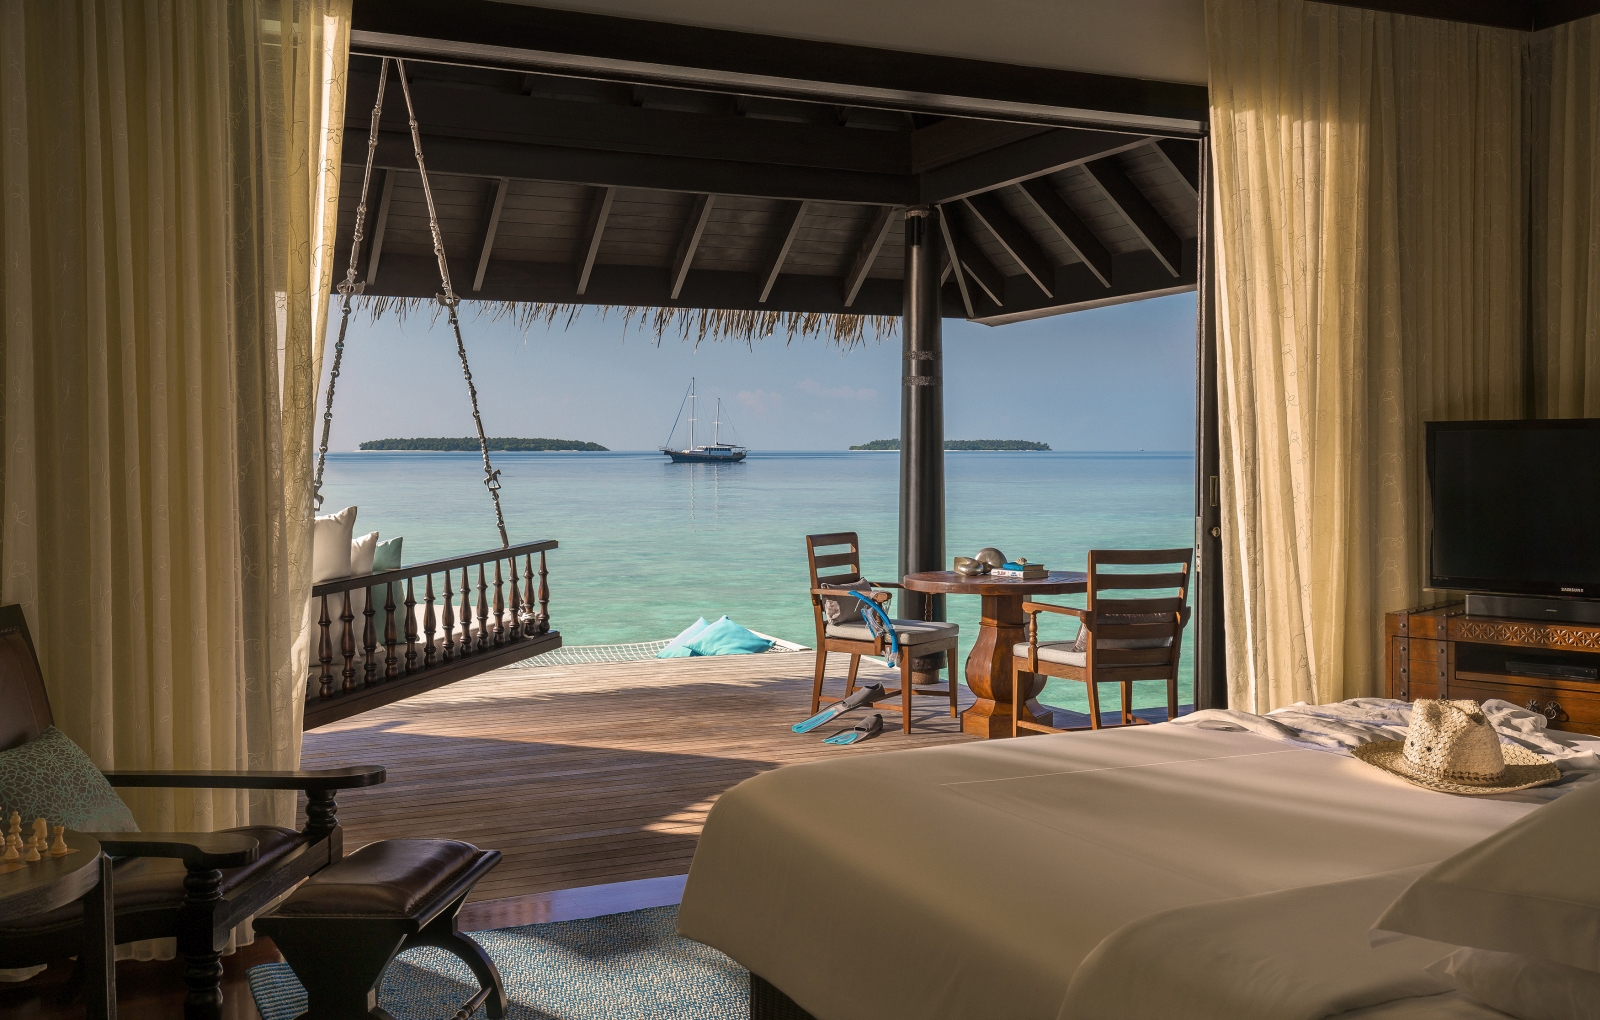 Overwater Villa with private deck at luxury resort Anantara Kihavah in the Maldives